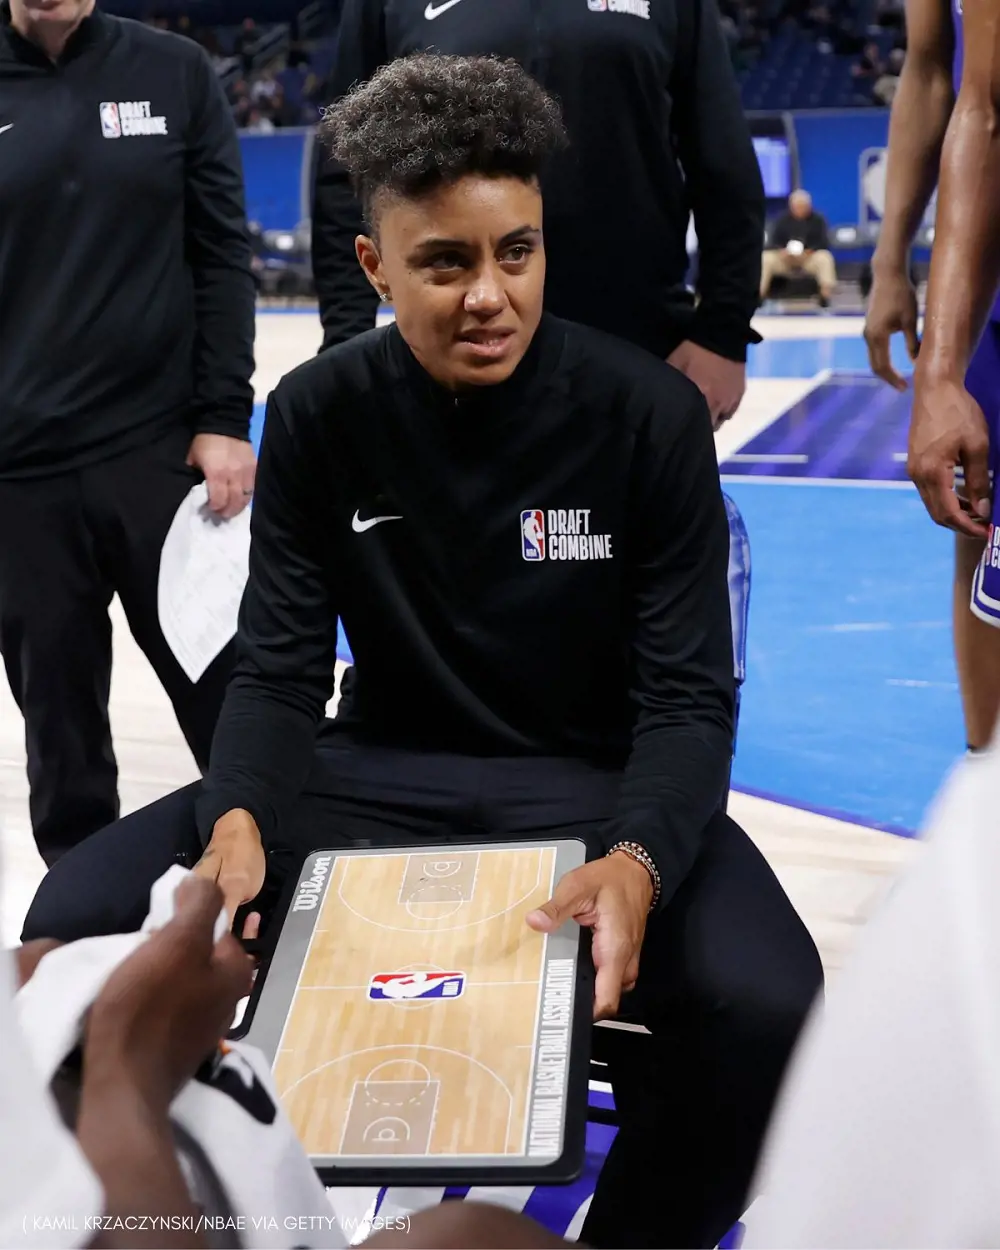 Candice Dupree is currently working as a player development coach for the San Antonio Spurs since 2022